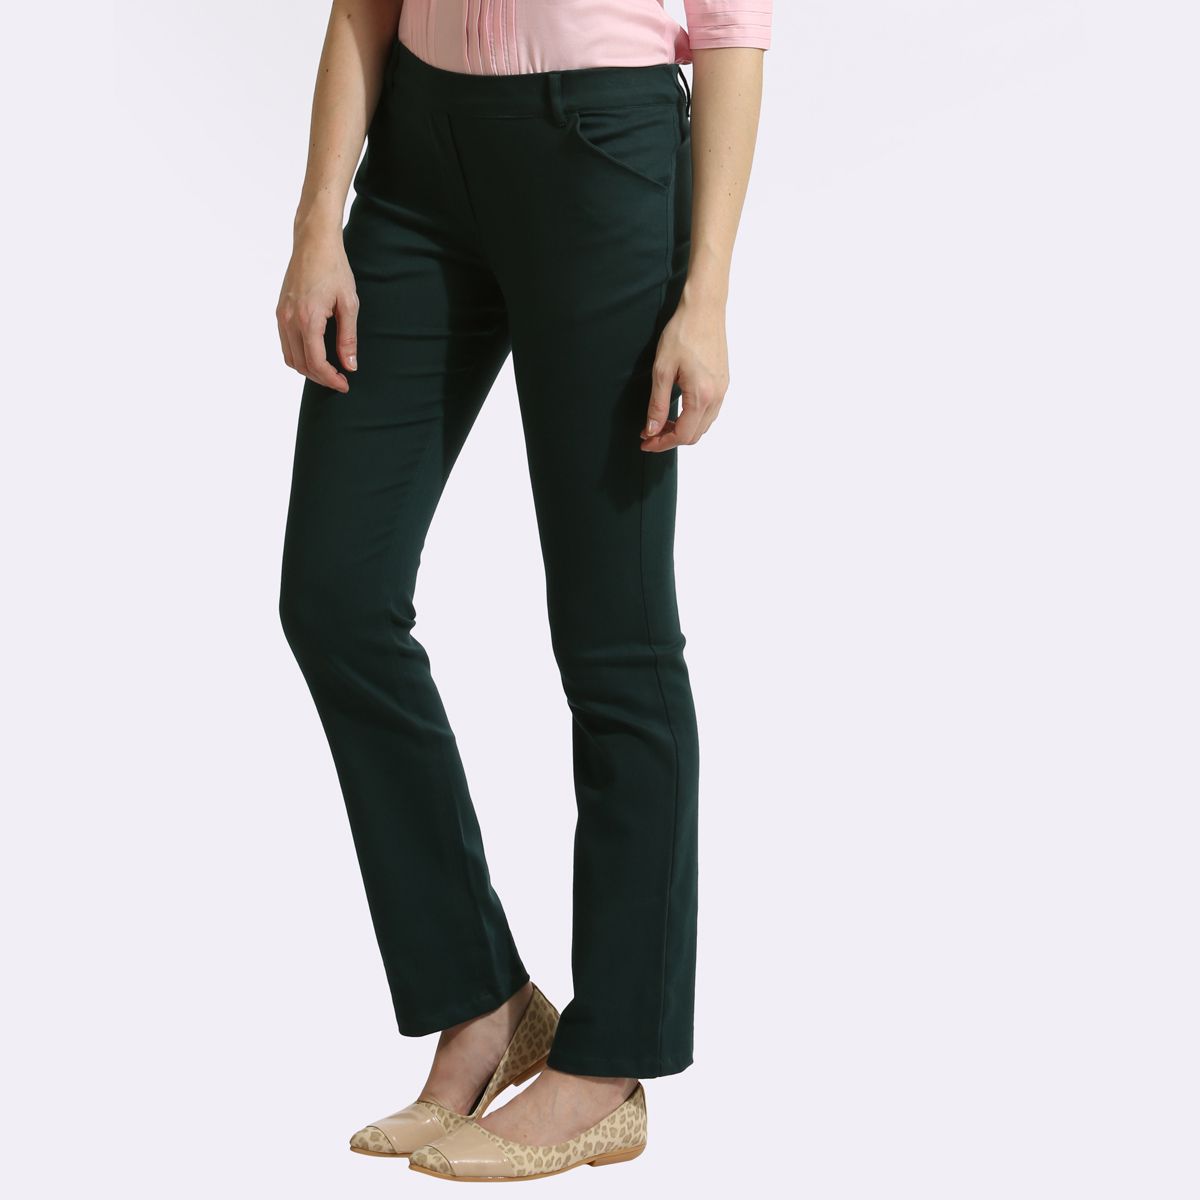 The Elasto Pants Cotton Super Stretch Pull On Deep Green